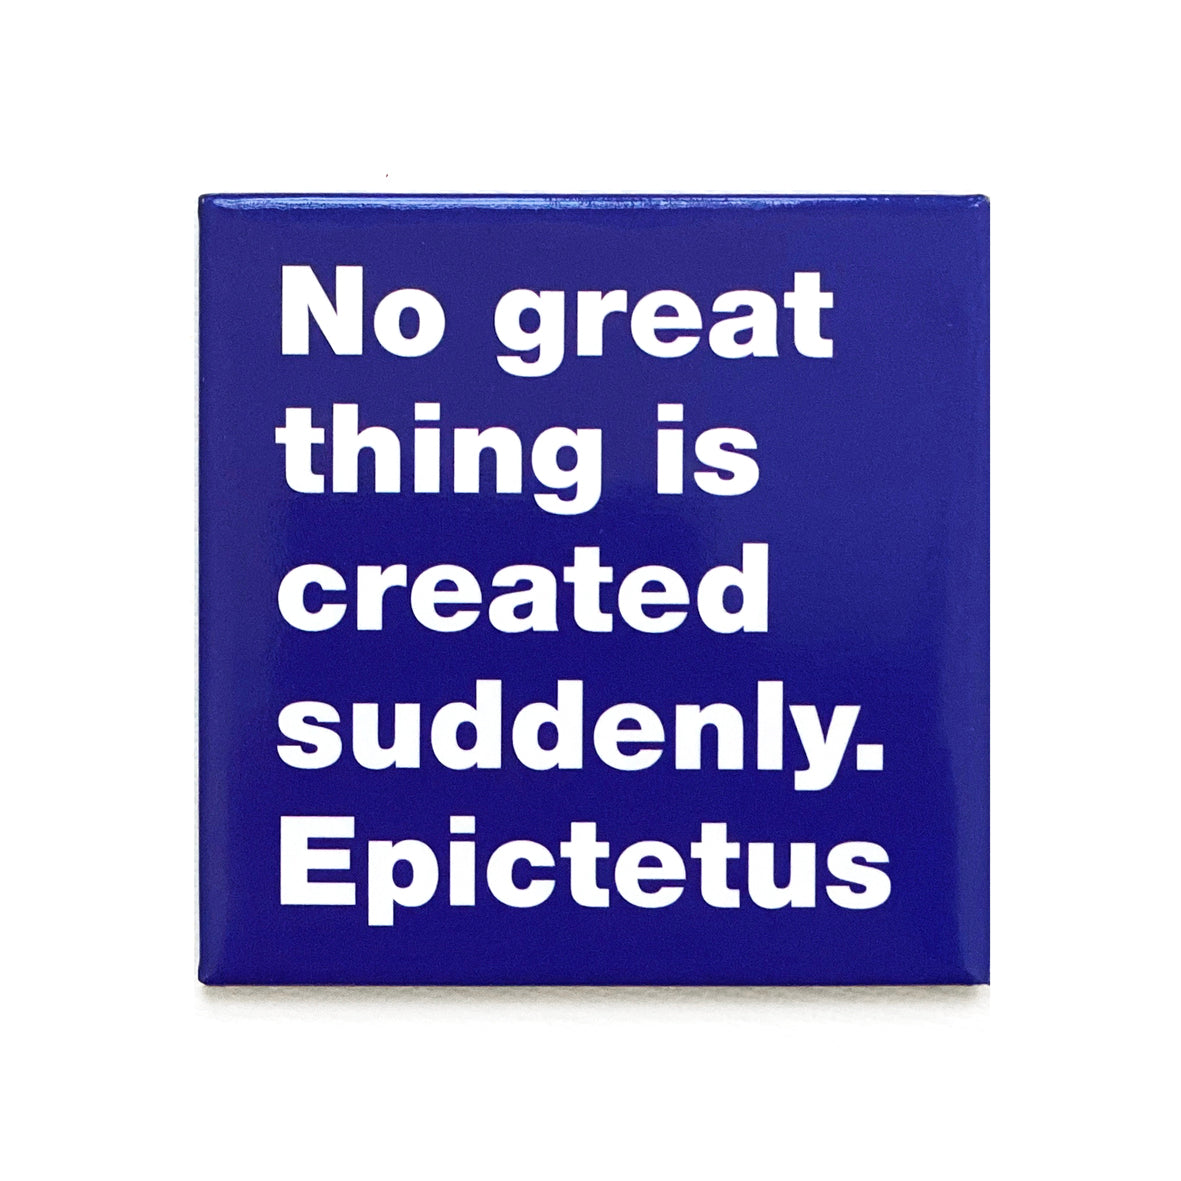 No great thing is created suddenly. Epictetus magnet